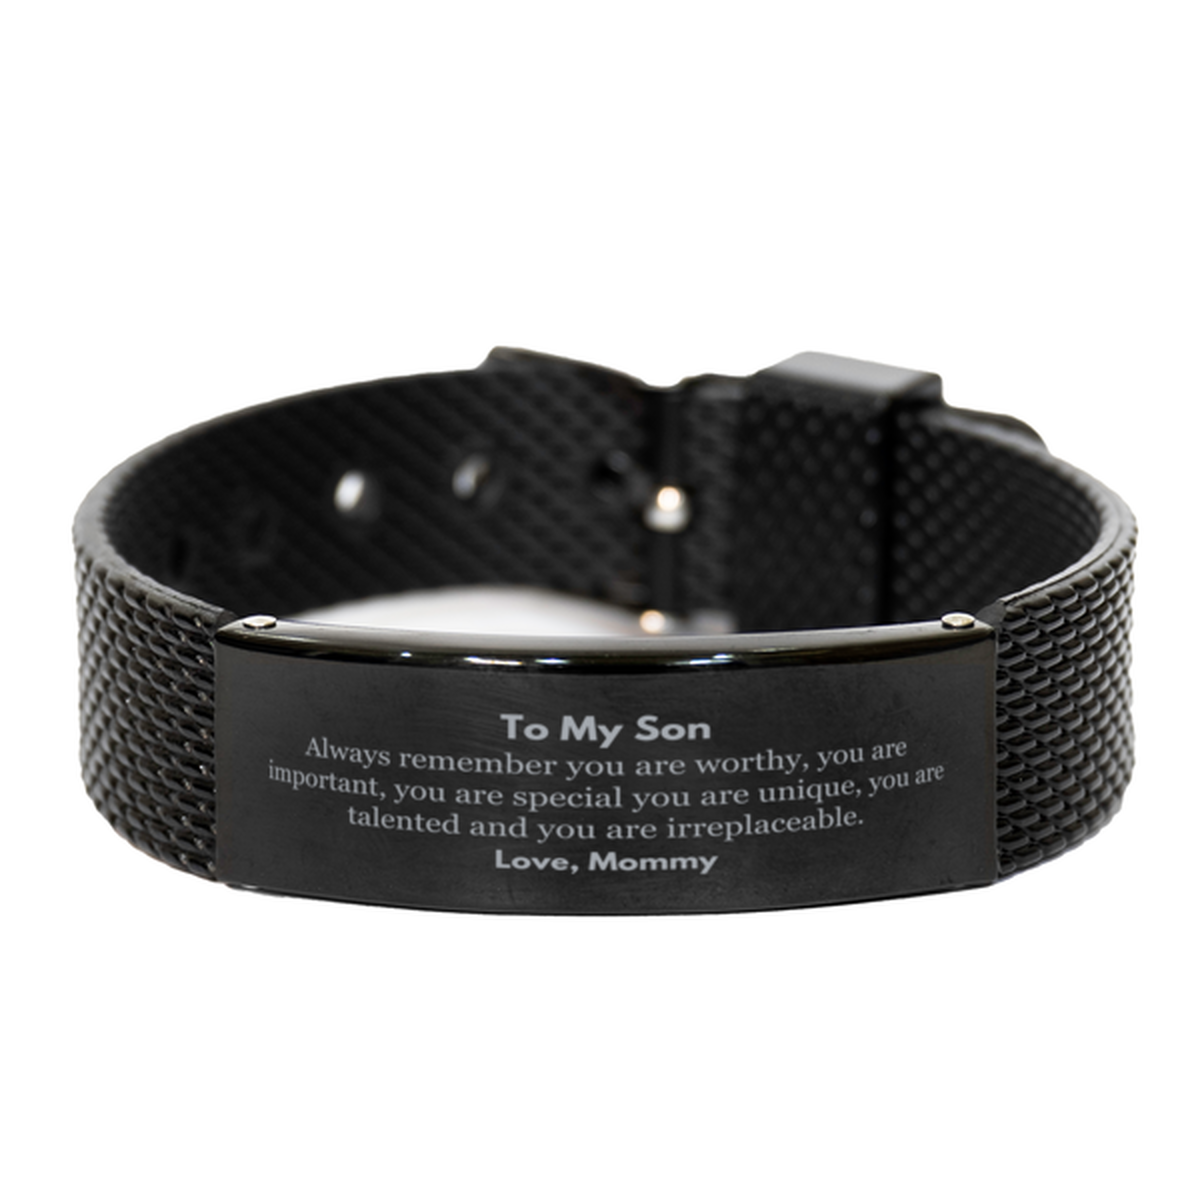 Son Birthday Gifts from Mommy, Inspirational Black Shark Mesh Bracelet for Son Christmas Graduation Gifts for Son Always remember you are worthy, you are important. Love, Mommy